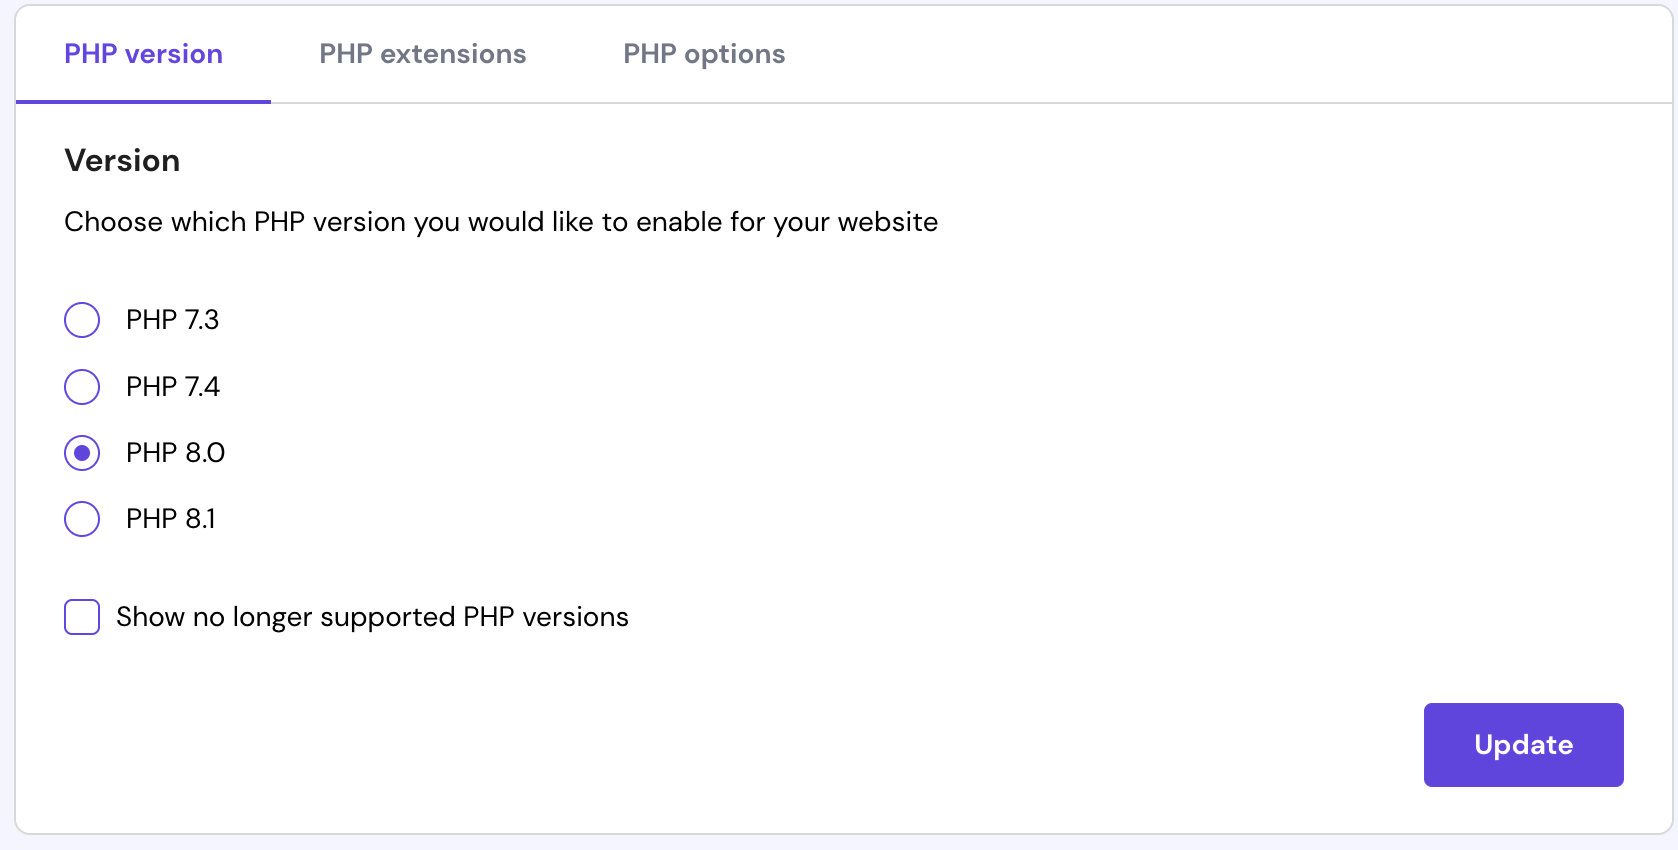 PHP Configuration page, here, users can change the PHP version and manage PHP extensions or options